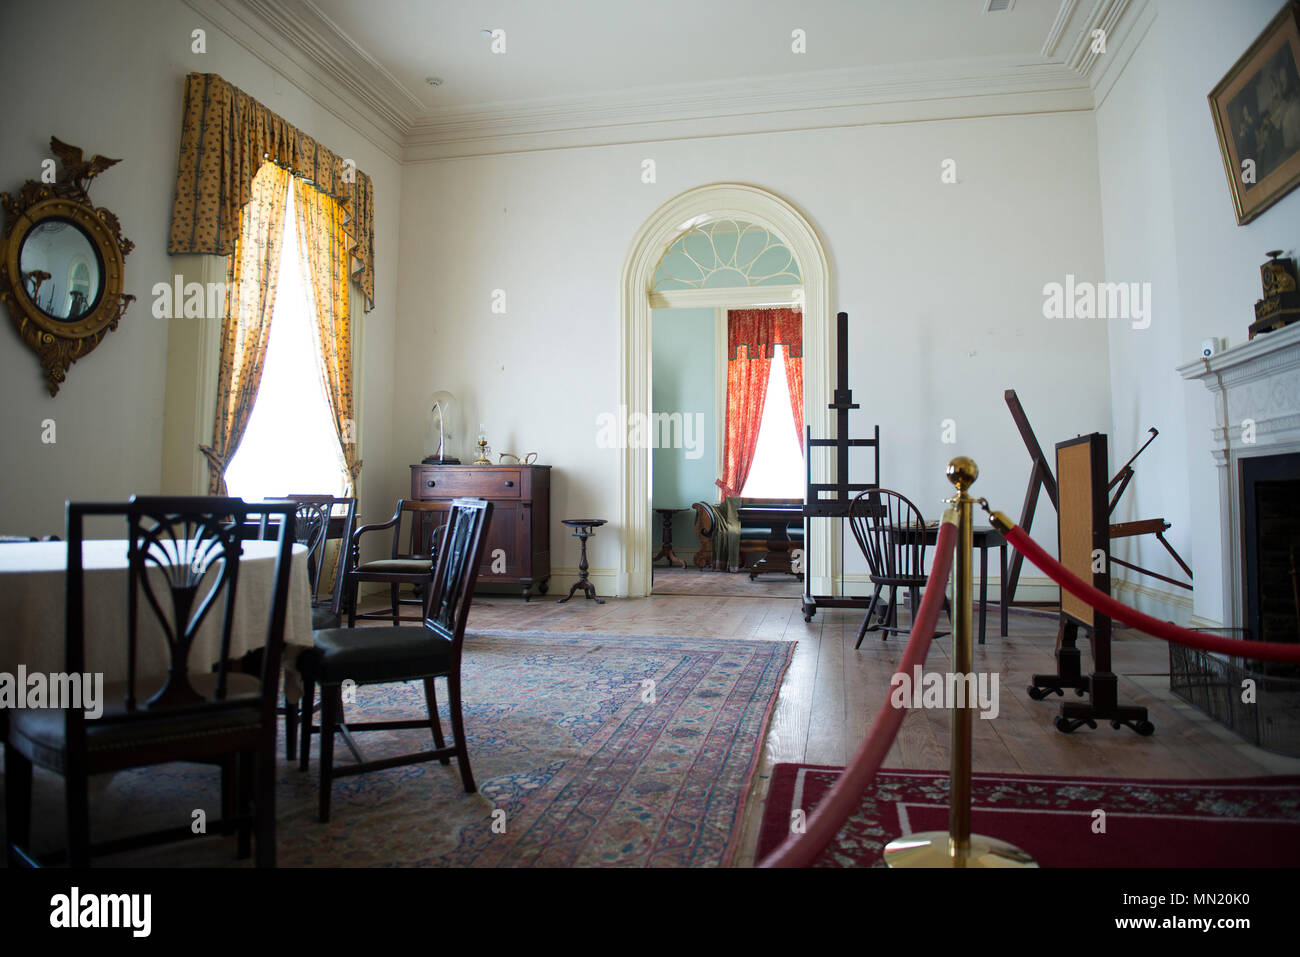 The Morning Room at Arlington House in Arlington National Cemetery, Arlington, Va., July 27, 2017.  In July of 2015, philanthropist David M. Rubinstein announced a $12.35 million donation to the National Park Foundation’s Centennial Campaign for America’s National Parks to restore and improve access to Arlington House.  This work is scheduled to begin in late August 2017, limiting access to visitors.  (U.S. Army photo by Elizabeth Fraser / Arlington National Cemetery / released) Stock Photo